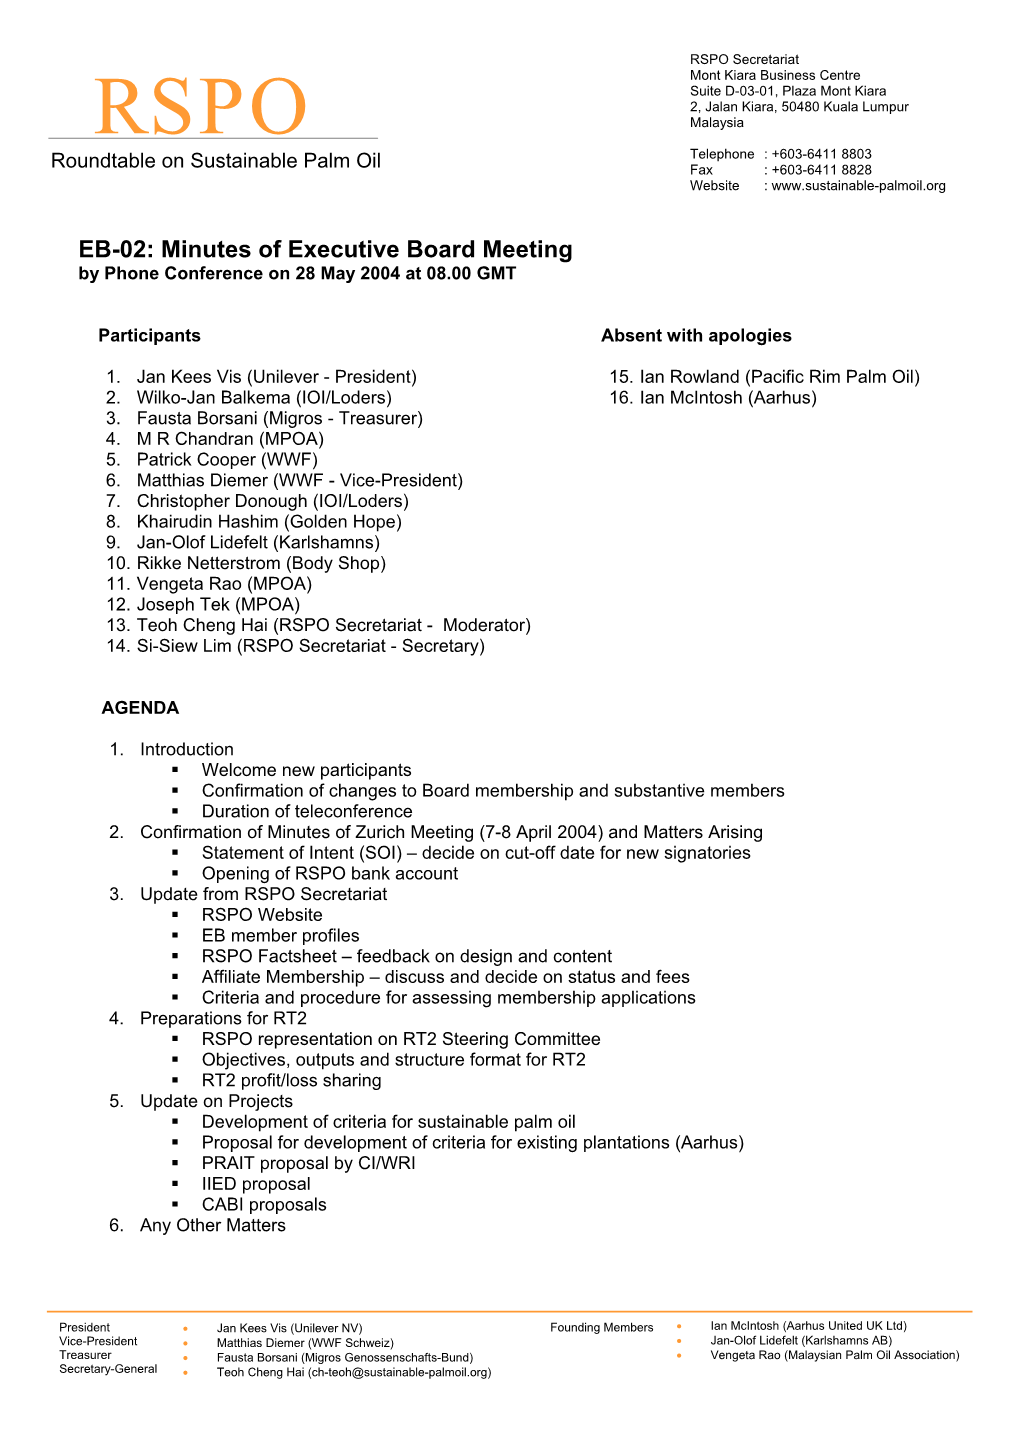 EB-02: Minutes of Executive Board Meeting by Phone Conference on 28 May 2004 at 08.00 GMT